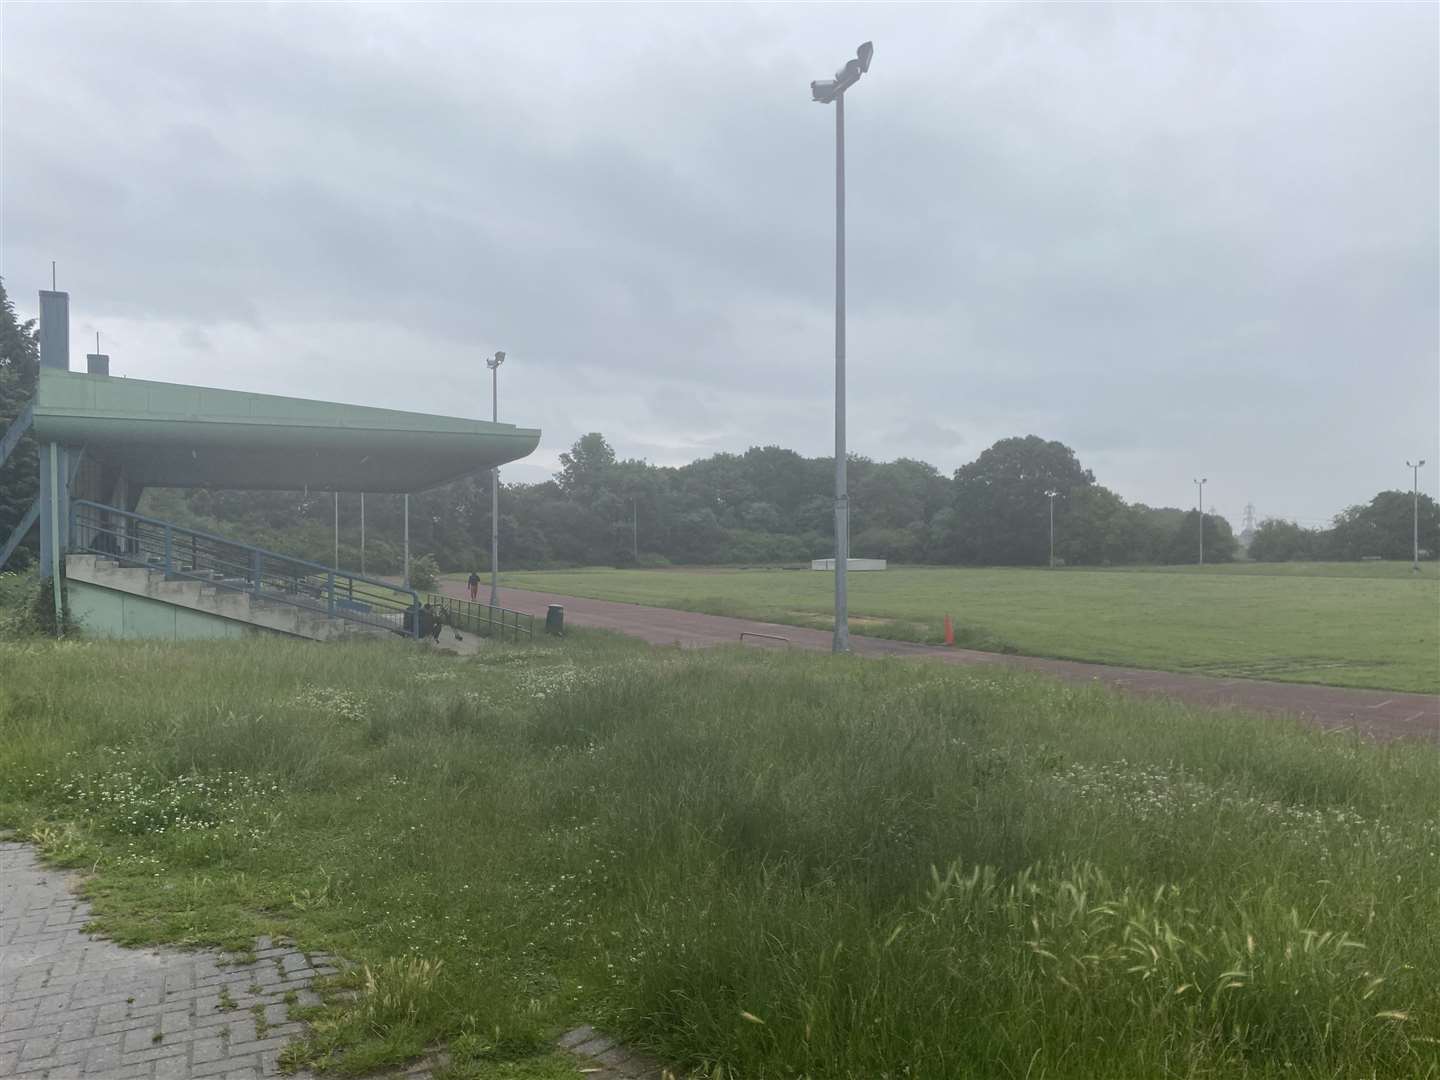 Residents say money should be spent upgrading the facilities and existing green spaces at Deangate, which featured a running track, and make it into a country park rather than building over and creating 'new green spaces' as part of the Hoo masterplan